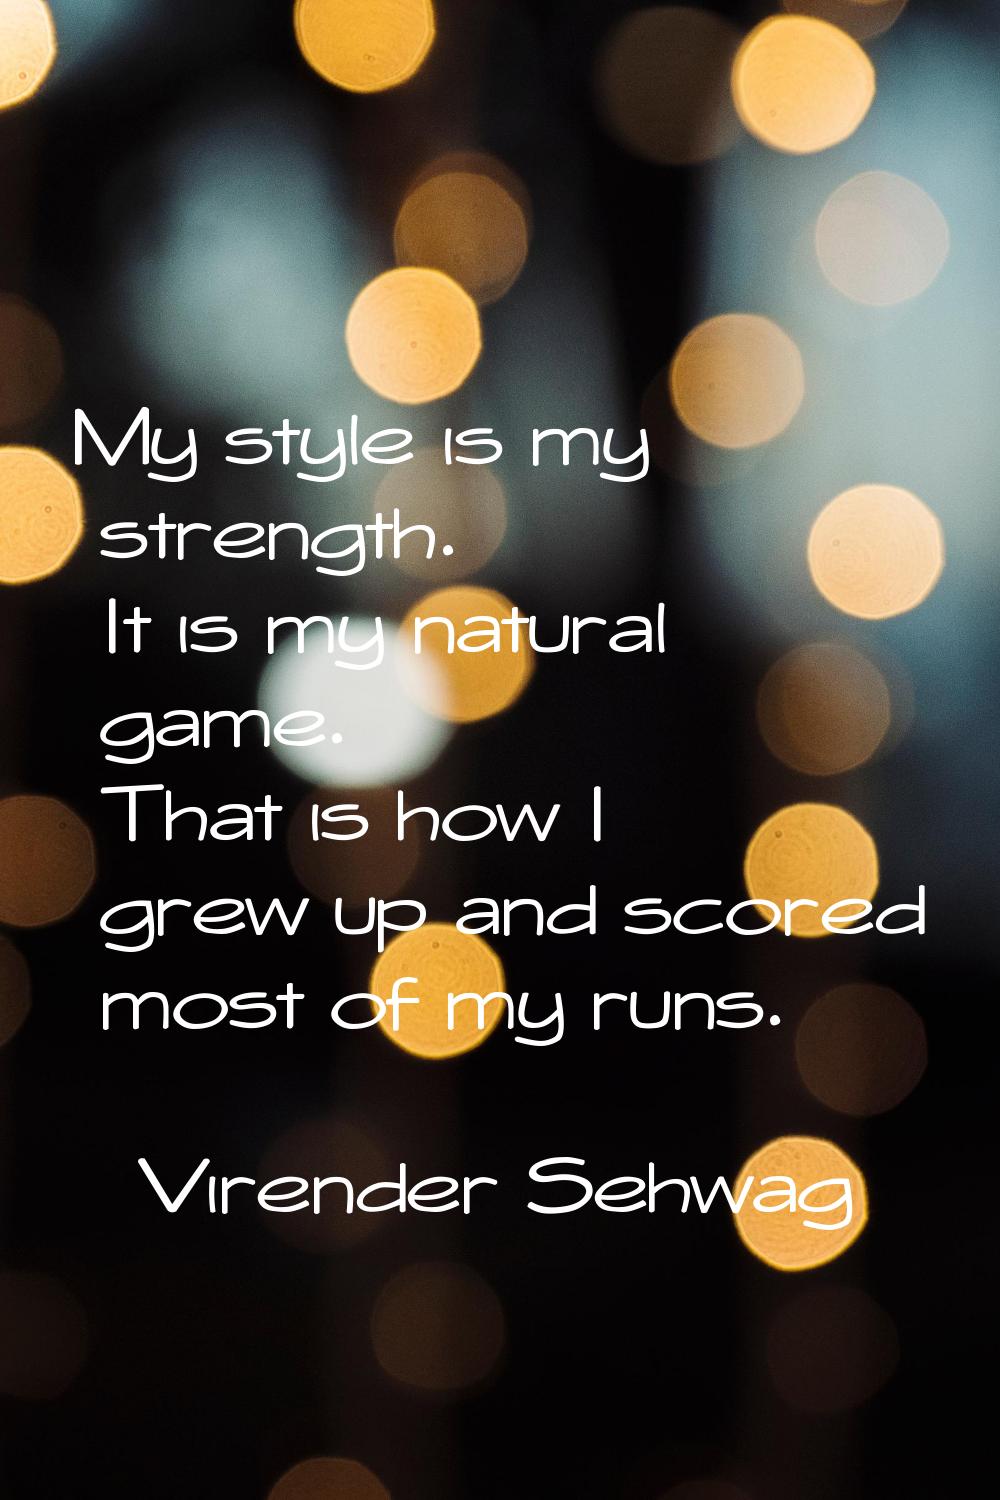 My style is my strength. It is my natural game. That is how I grew up and scored most of my runs.